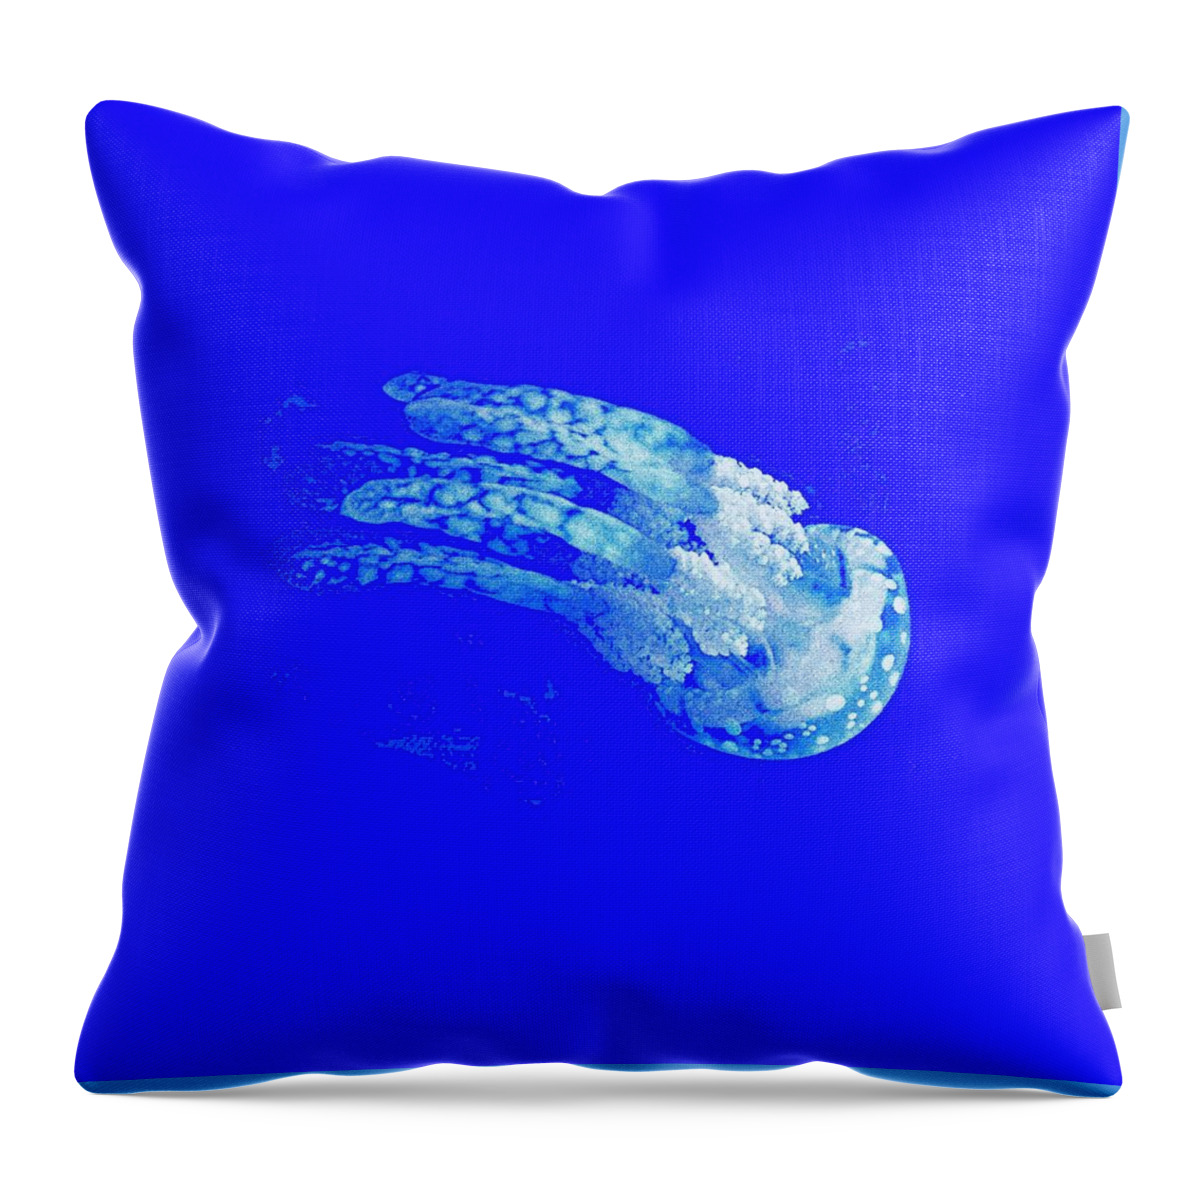 Jellyfish Throw Pillow featuring the painting The Glowing Jelly Fish by Adam Asar by Celestial Images